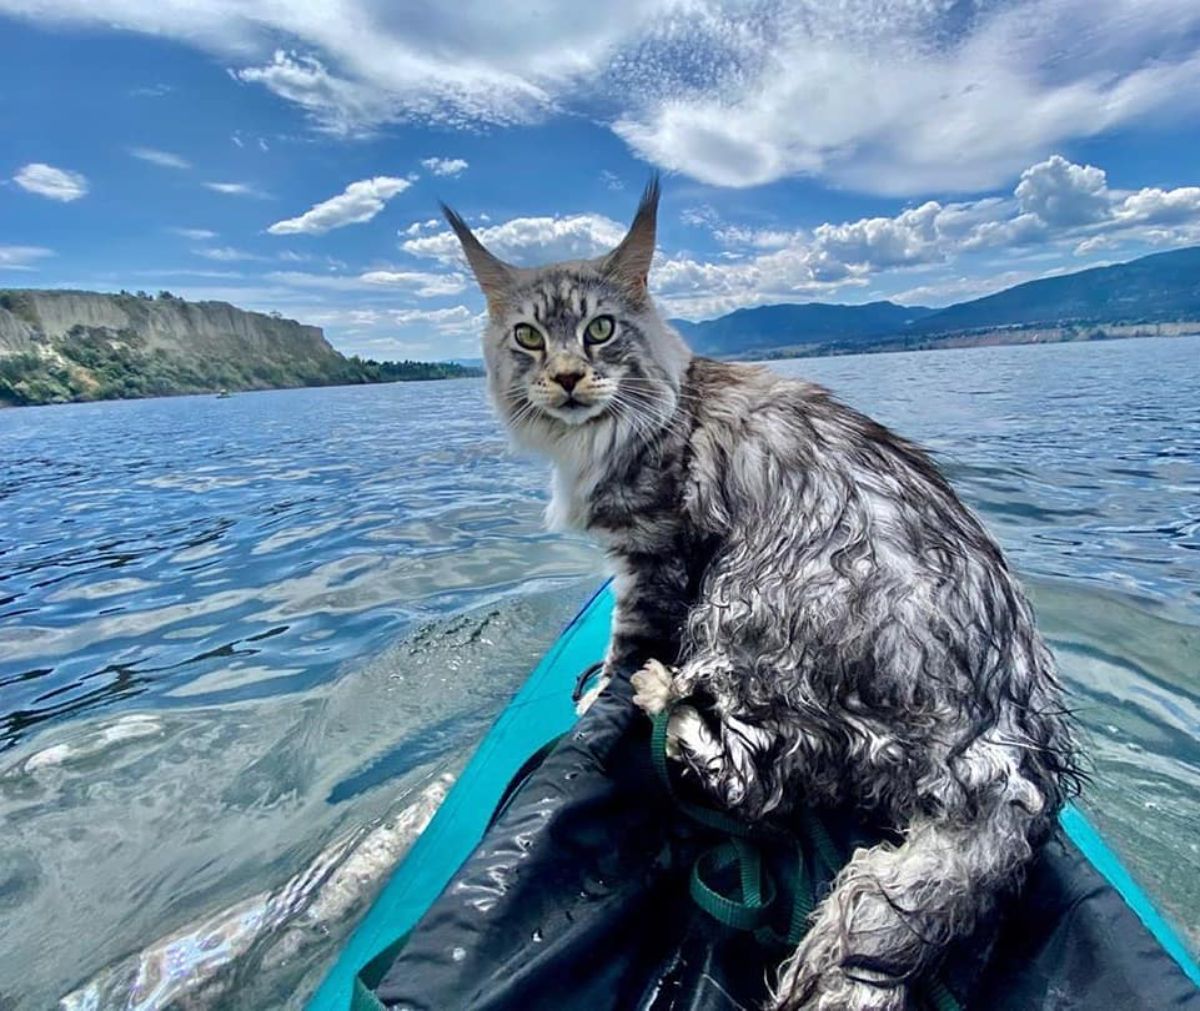 A silver maine coon sitting in a canoe.